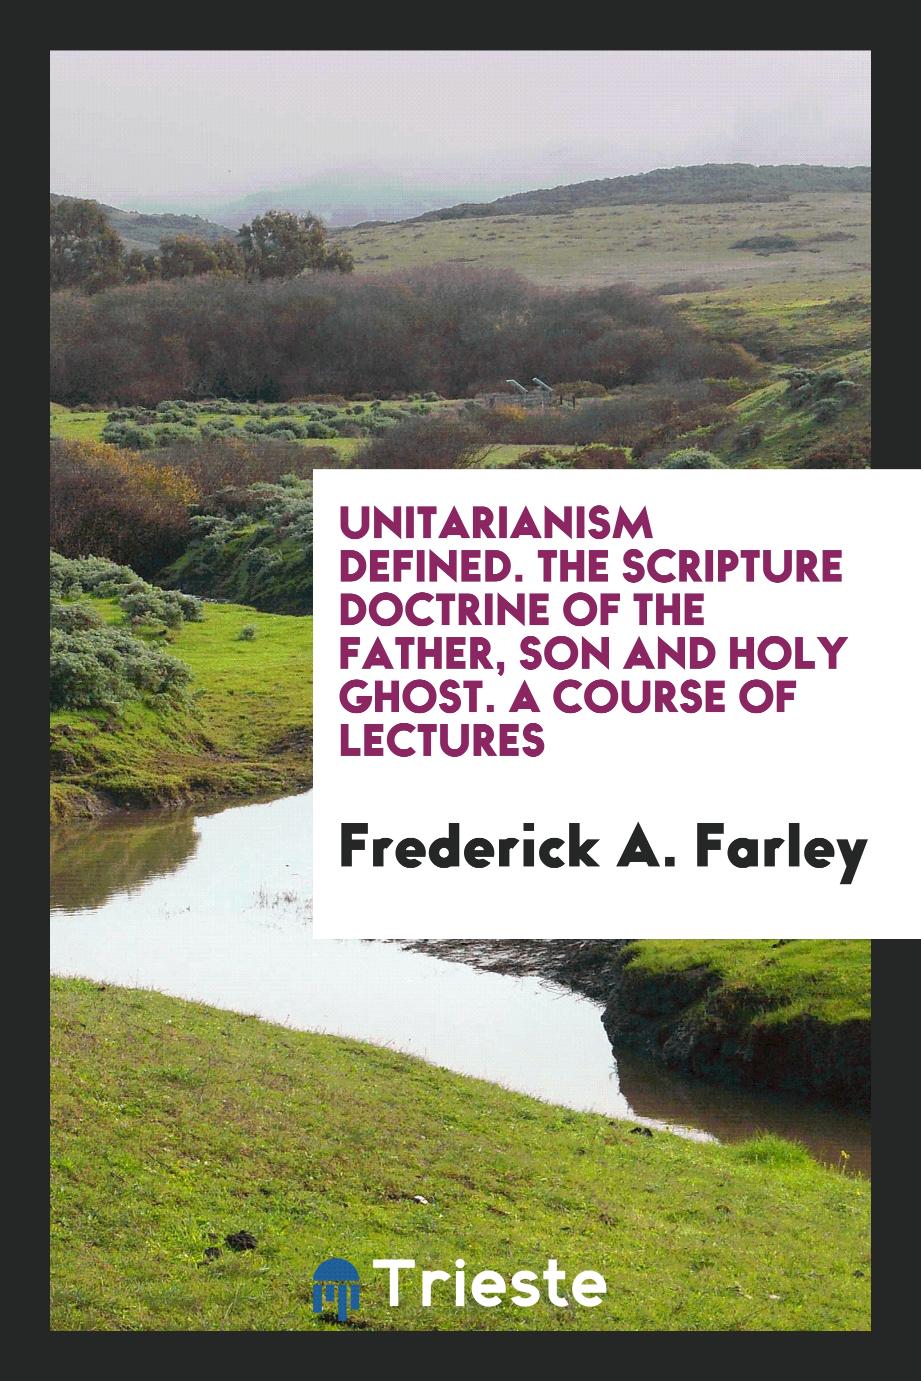 Unitarianism defined. The Scripture doctrine of the Father, Son and Holy Ghost. A course of lectures